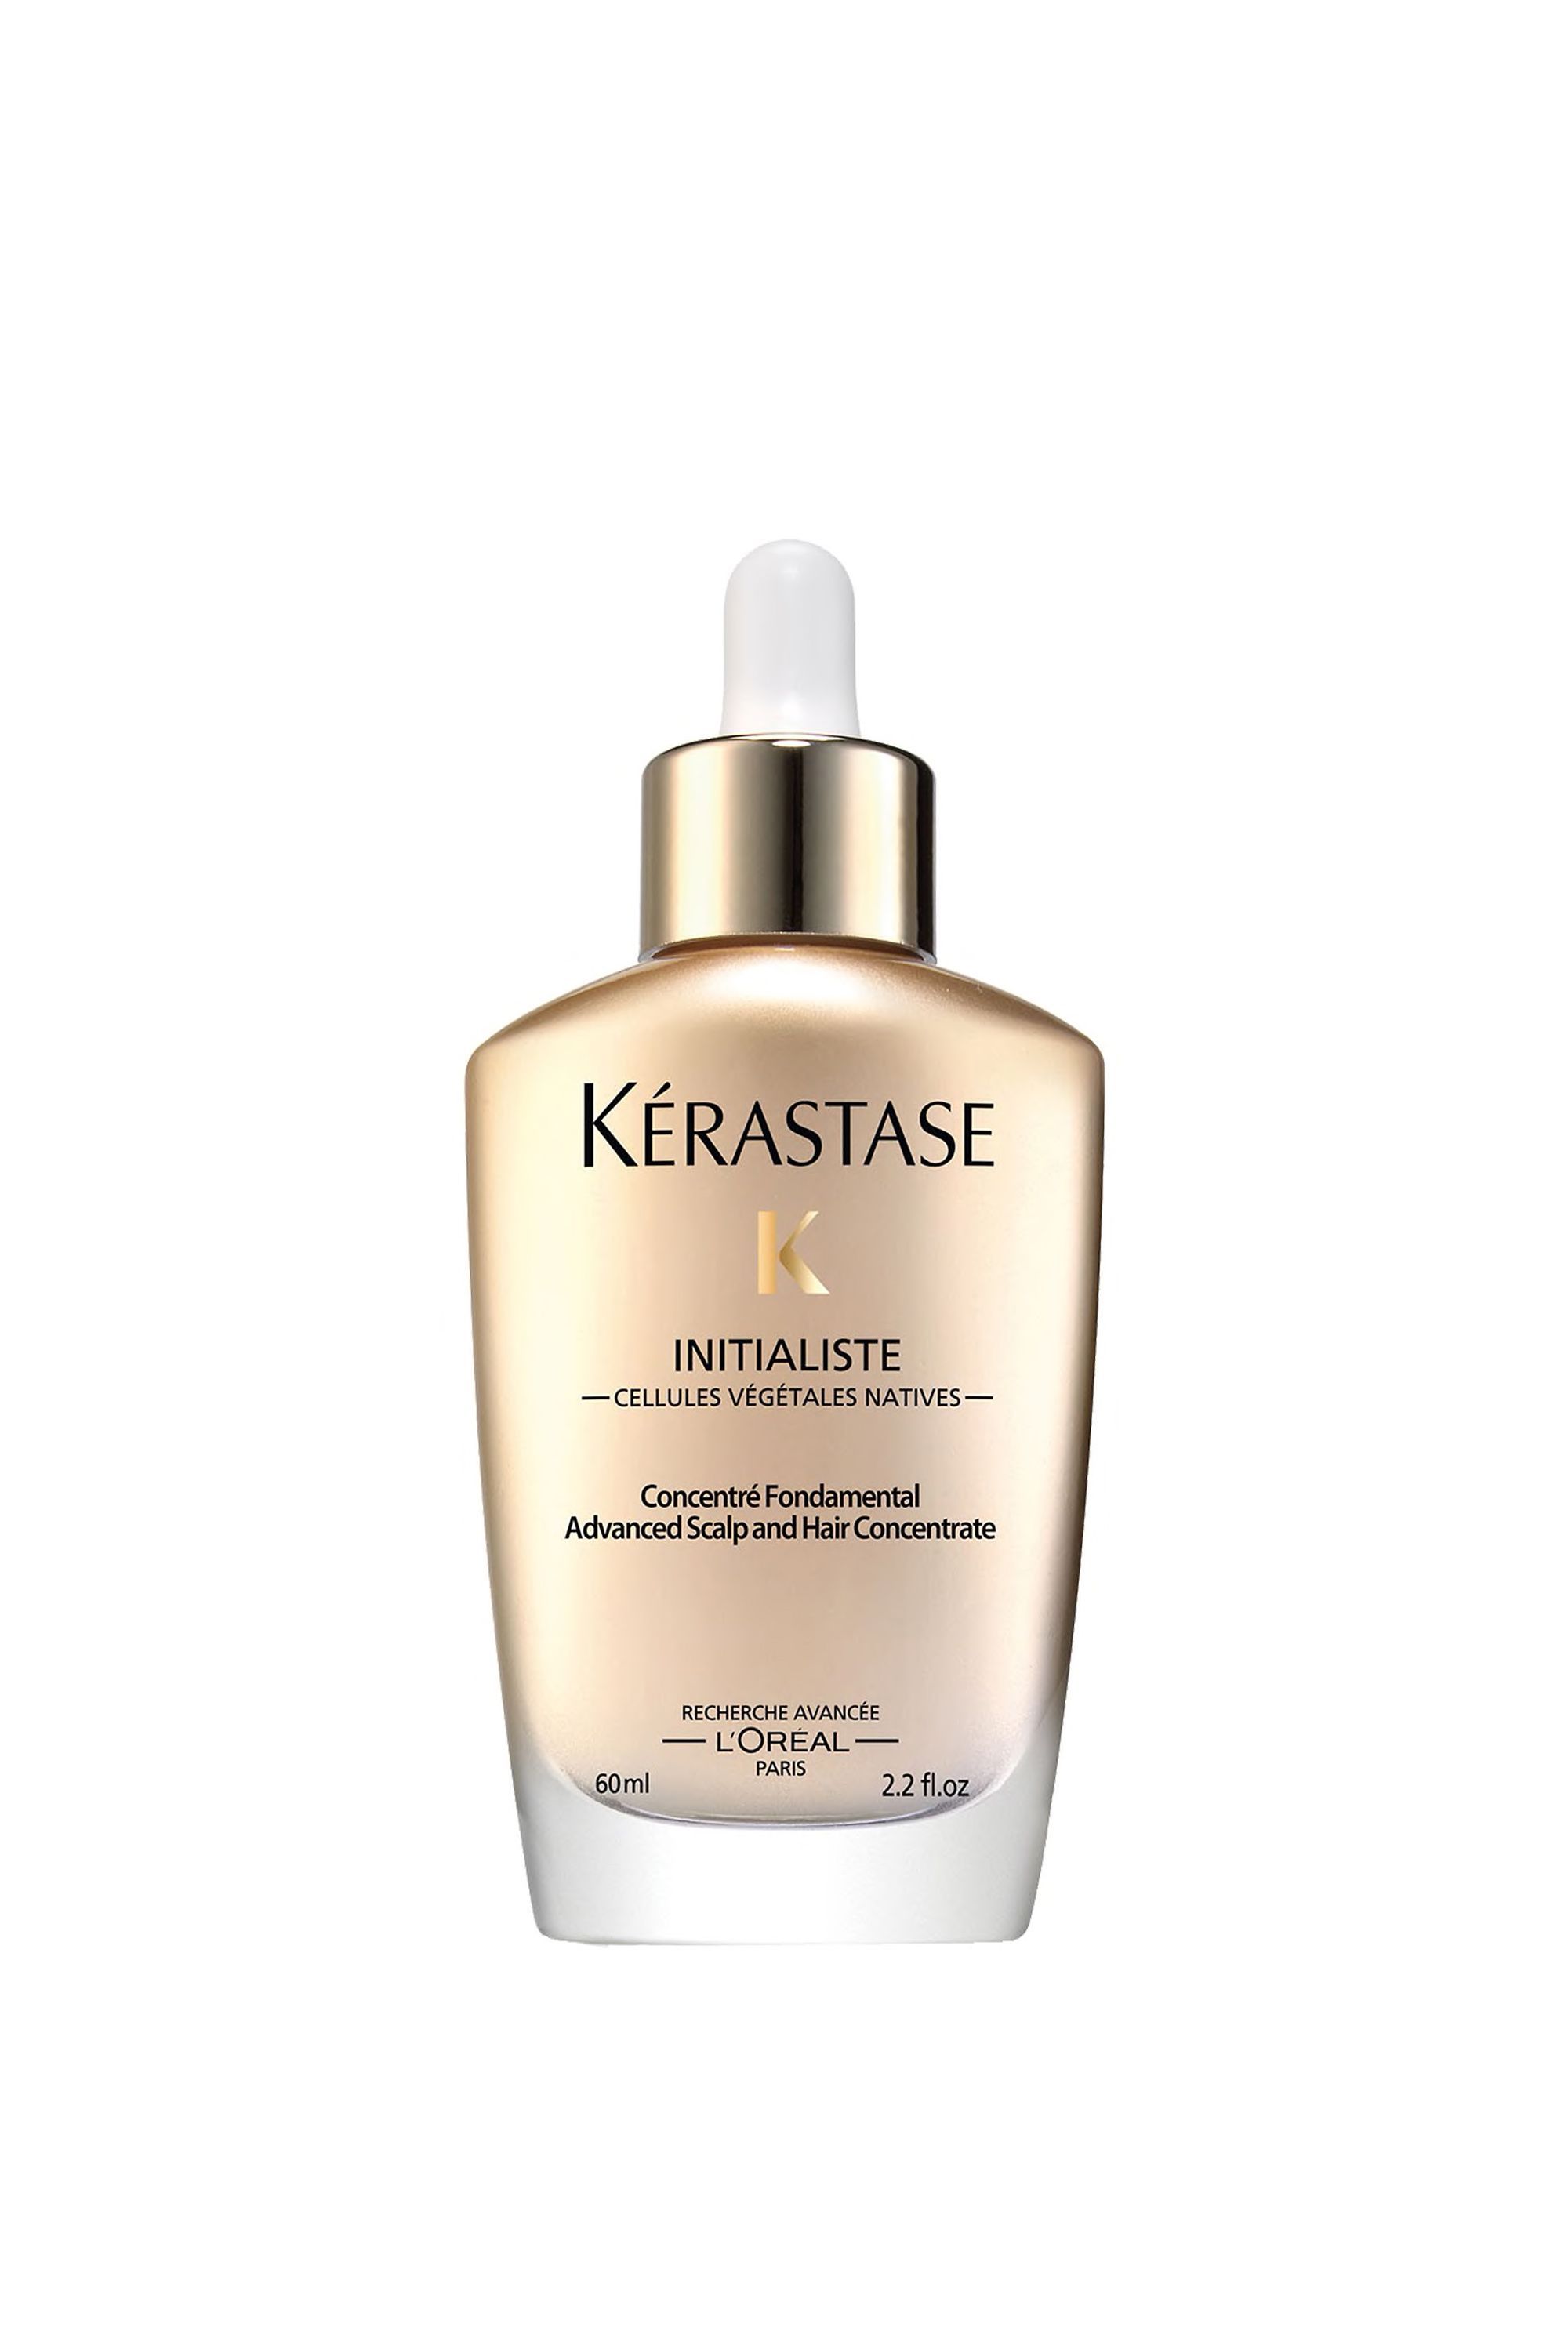 KERASTASE GENESIS AFTER 3 MONTHS  HONEST REVIEW for hair loss  hair fall   YouTube